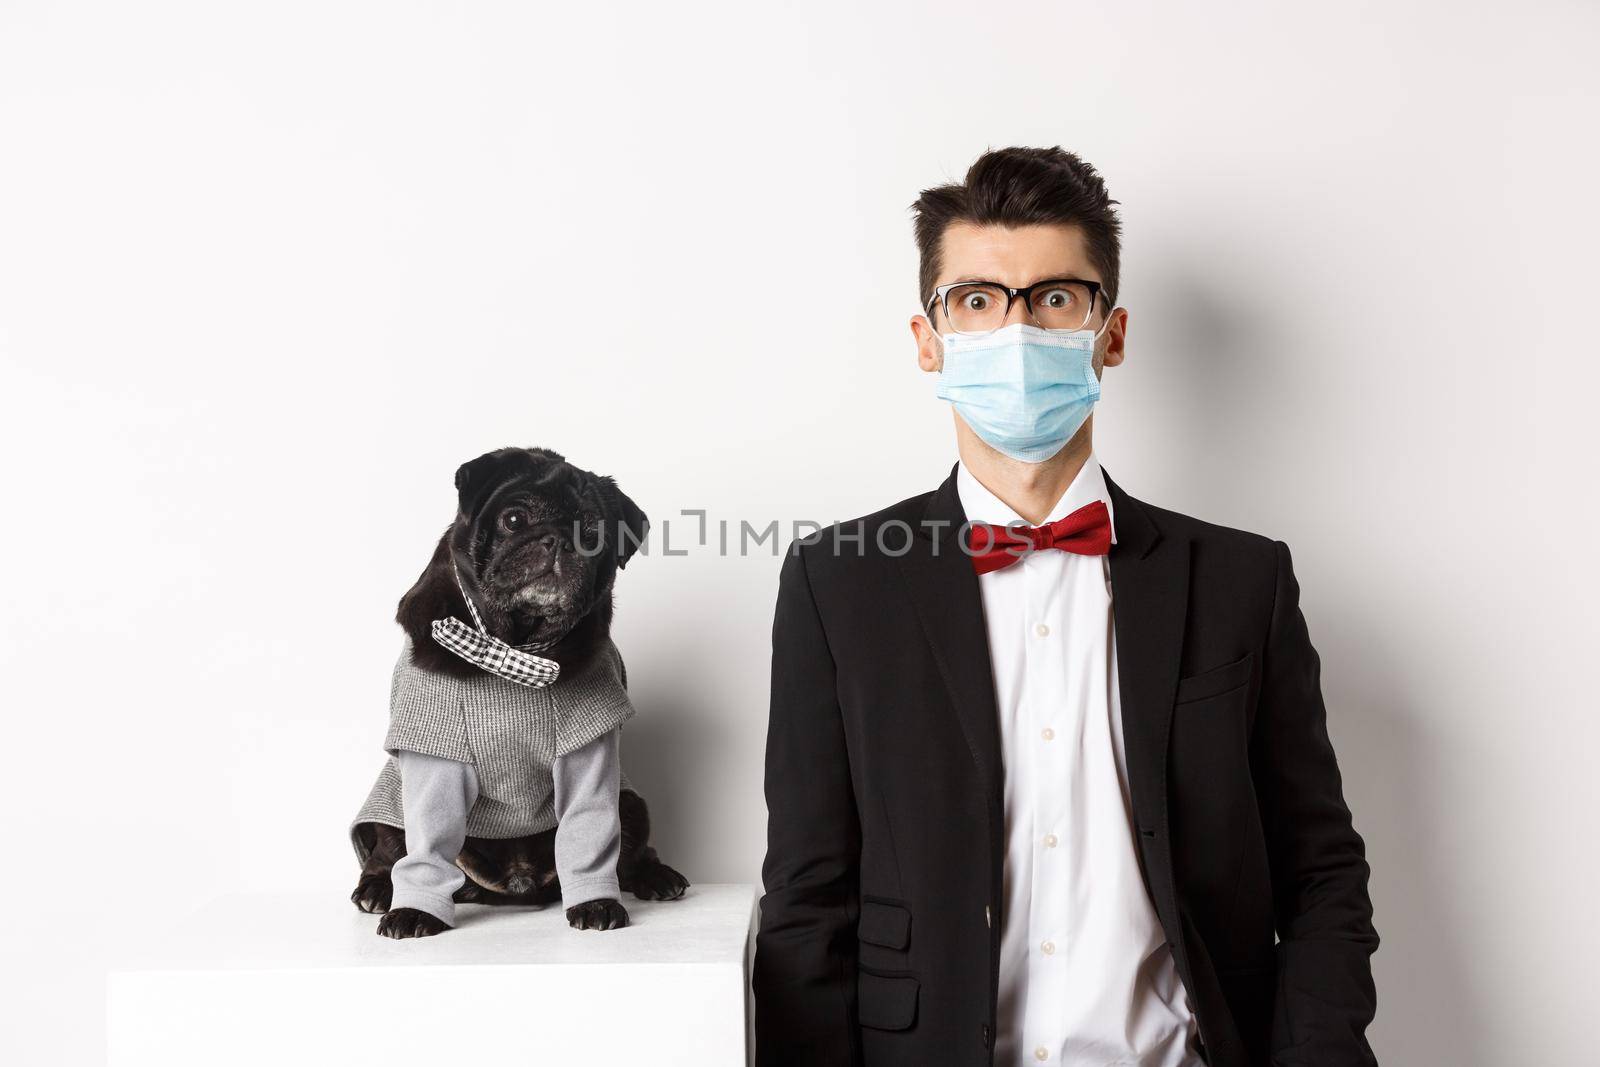 Coronavirus, pets and celebration concept. Handsome young man and dog wearing suits, guy have medical mask, standing over white background.